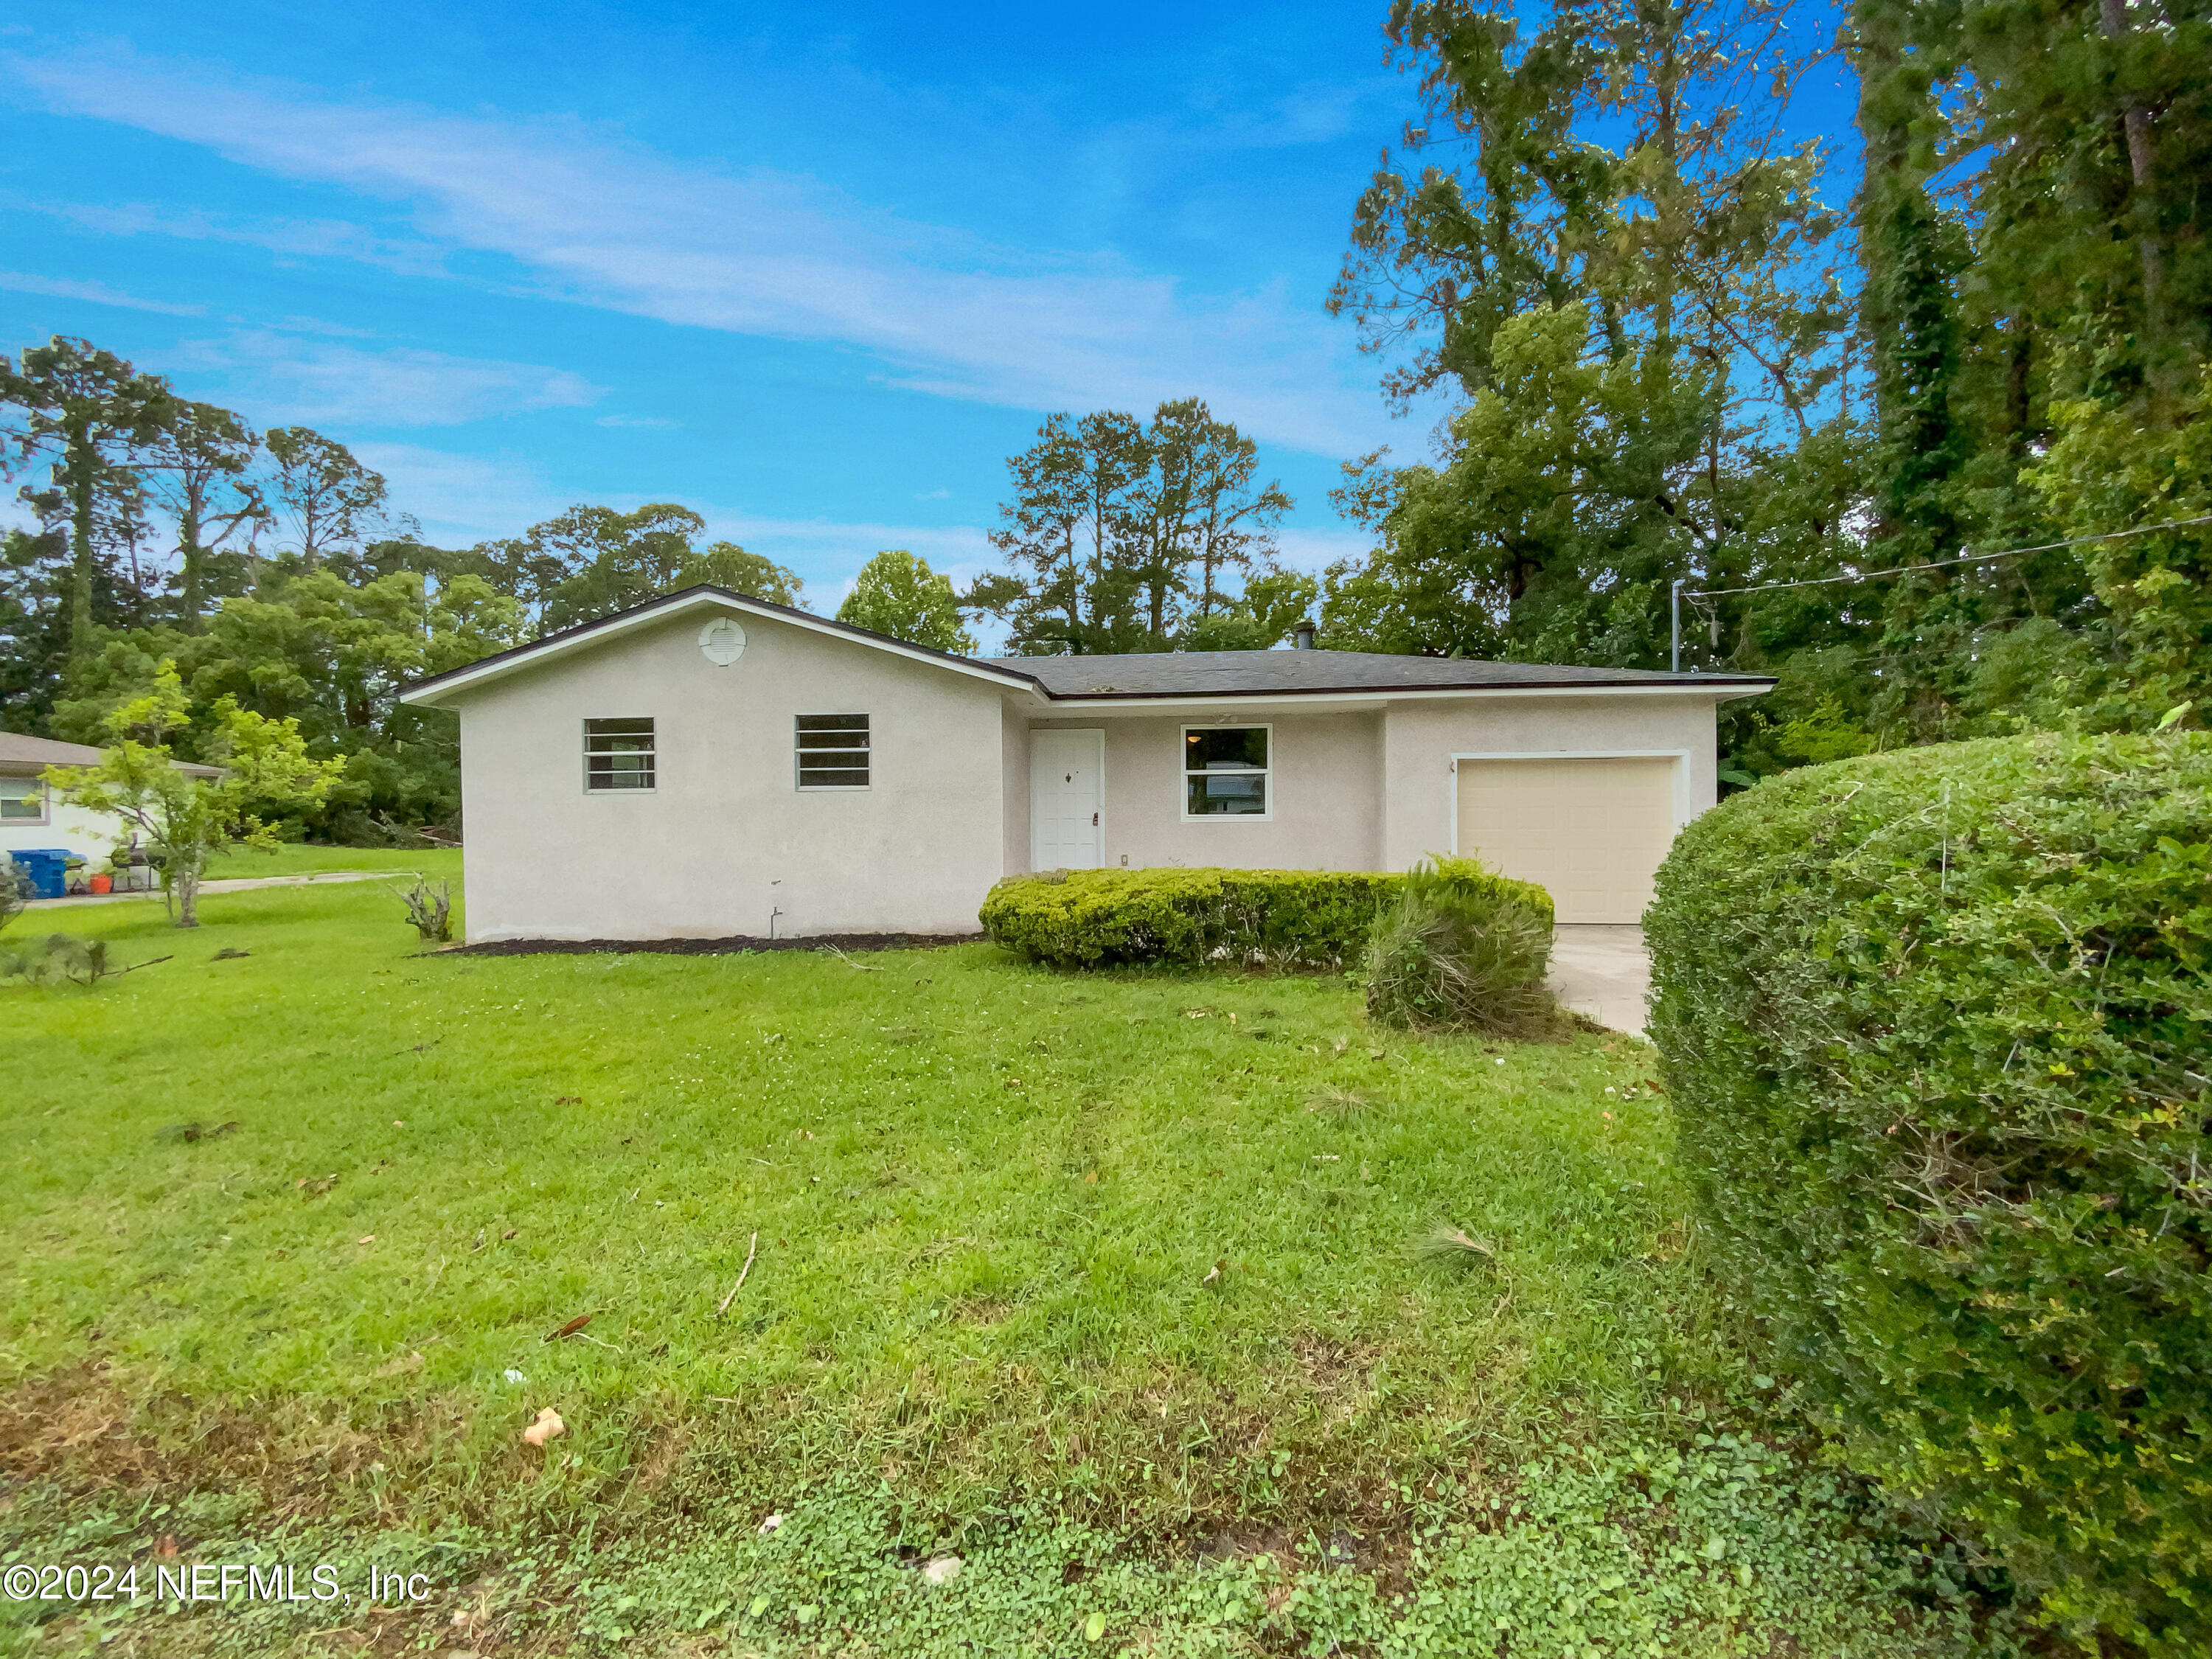 Jacksonville, FL home for sale located at 9130 9th Avenue, Jacksonville, FL 32208